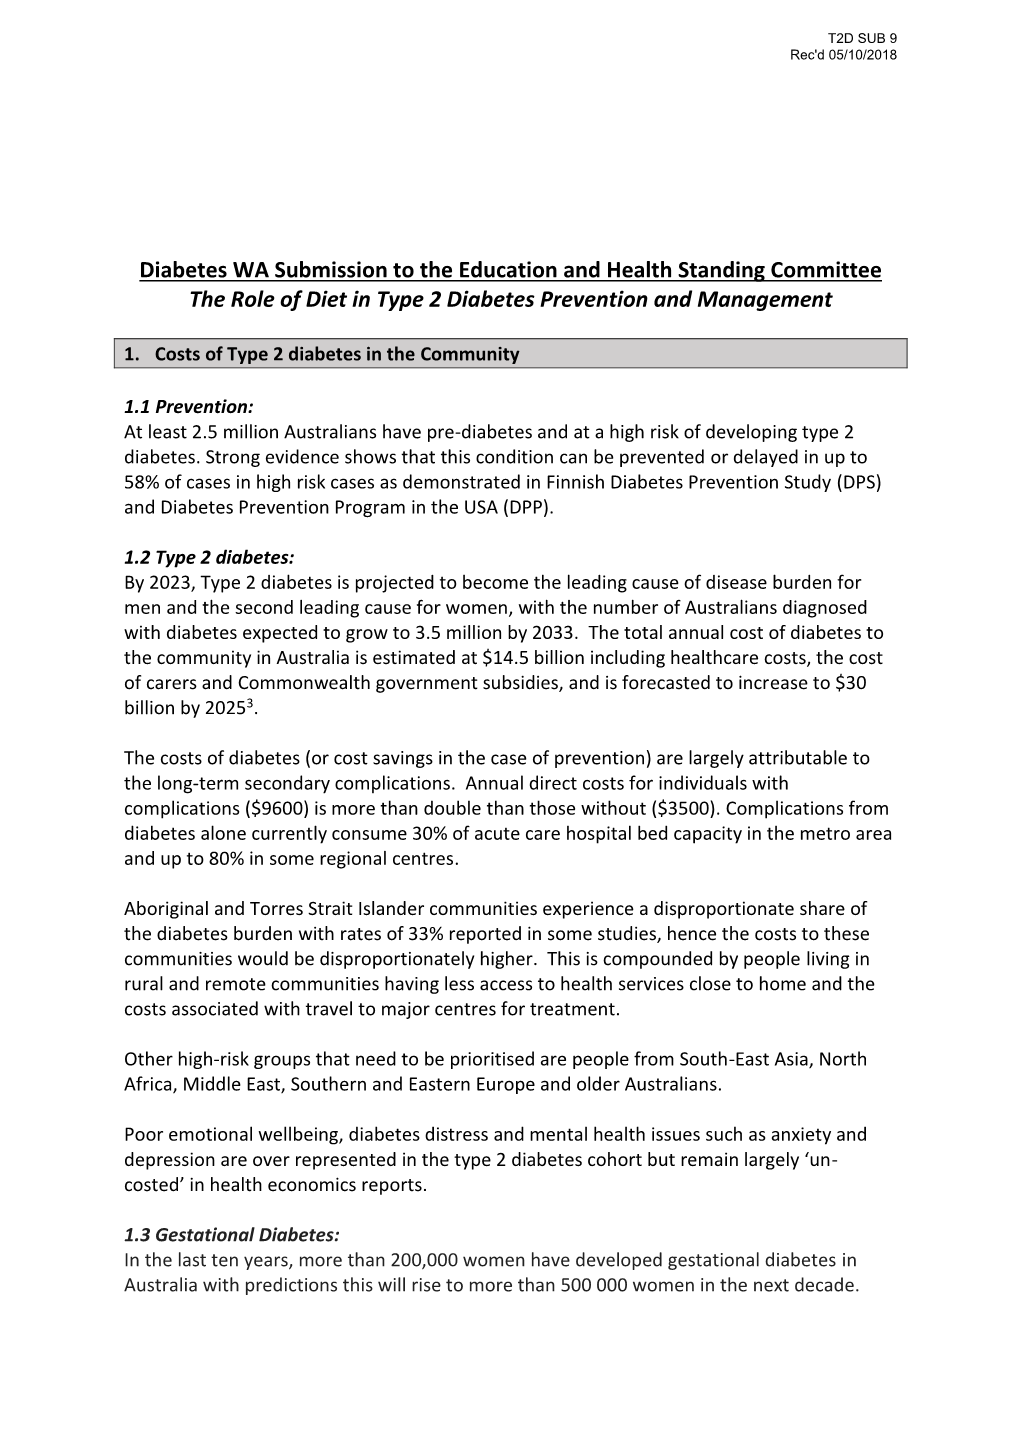 Diabetes WA Submission to the Education and Health Standing Committee the Role of Diet in Type 2 Diabetes Prevention and Management